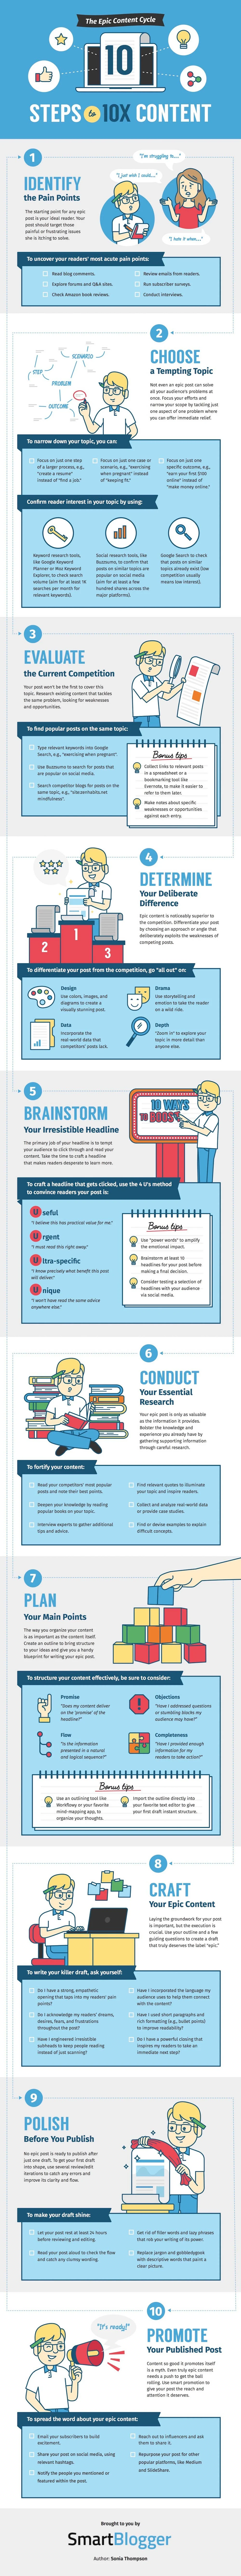 The Epic Content Cycle: 10 Steps to 10X Content - #Infographic